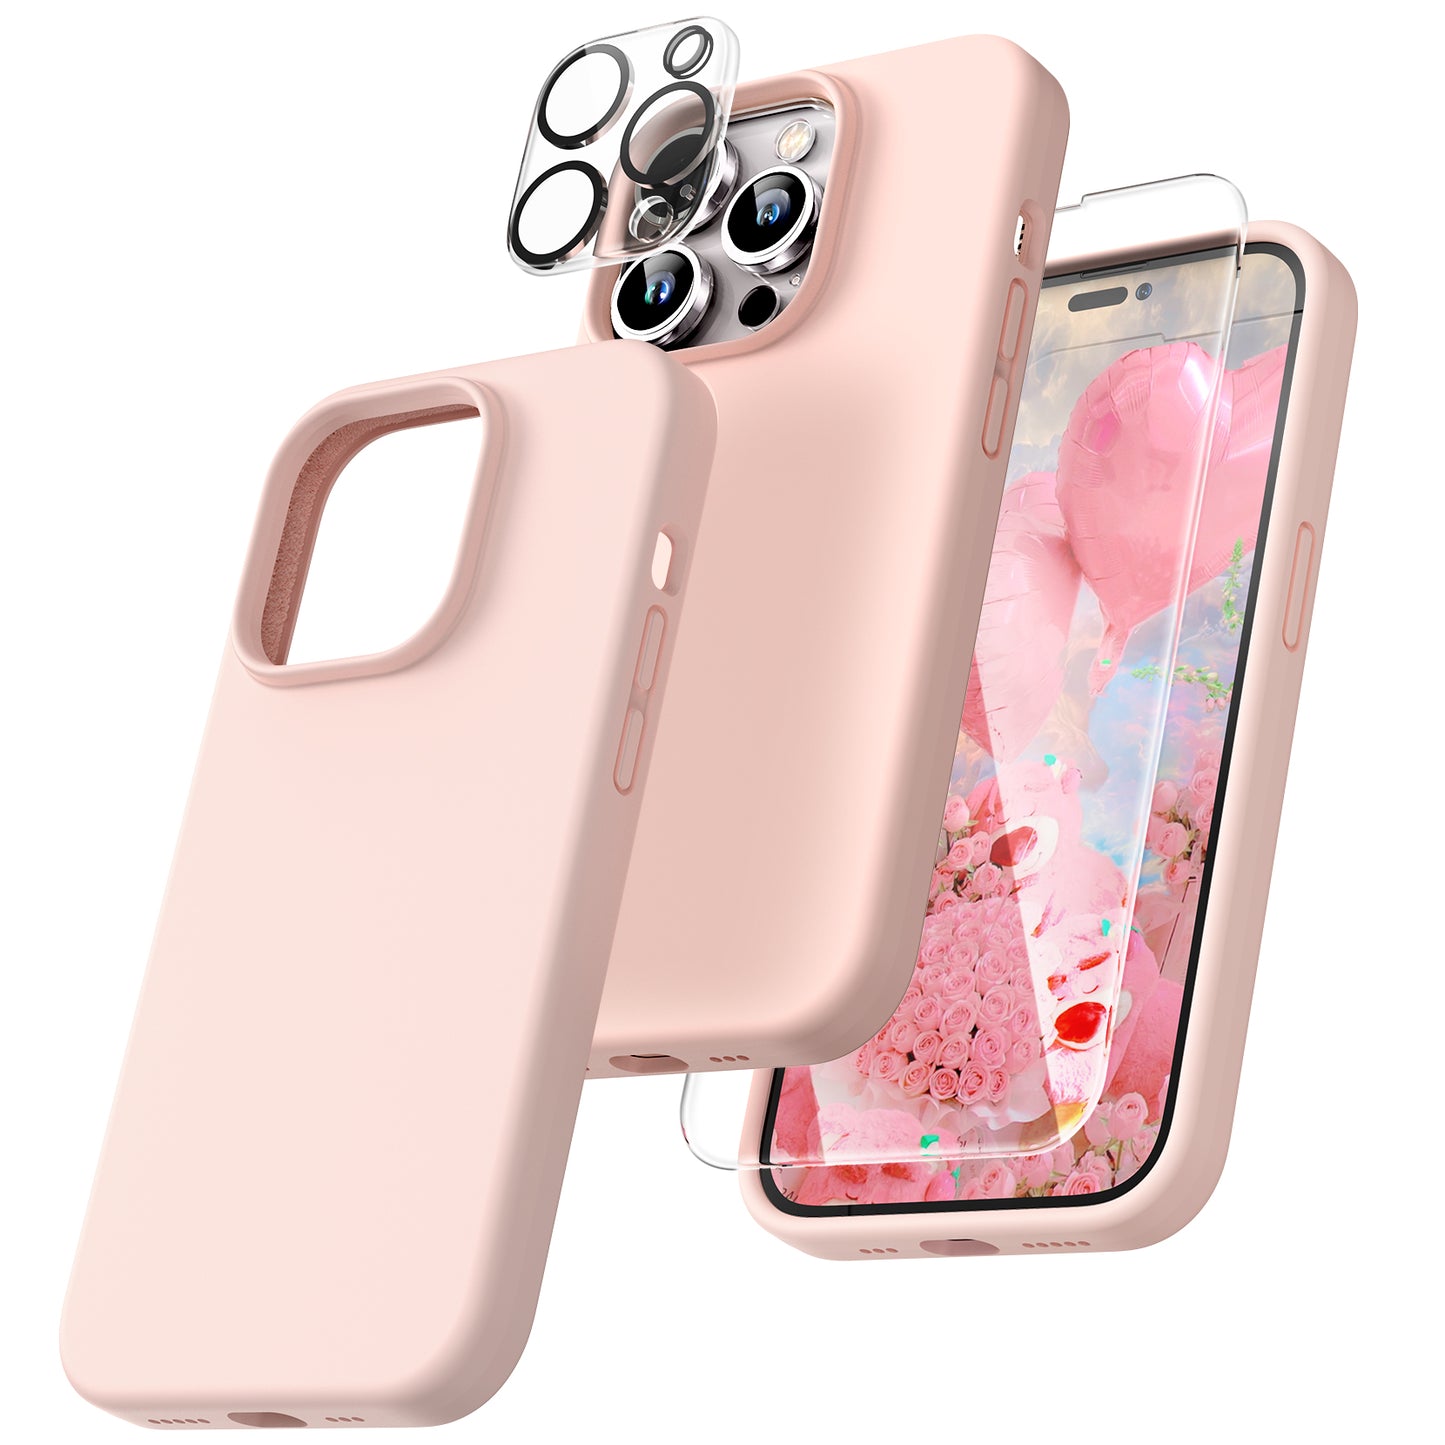 TOCOL [5 in 1] for iPhone 14 Pro Case, 2 Pack Screen Protector + 2 Pack Camera Lens Protector, Slim Liquid Silicone Phone Case iPhone 14 Pro 6.1 Inch, [Anti-Scratch] [Drop Protection], Chalk Pink